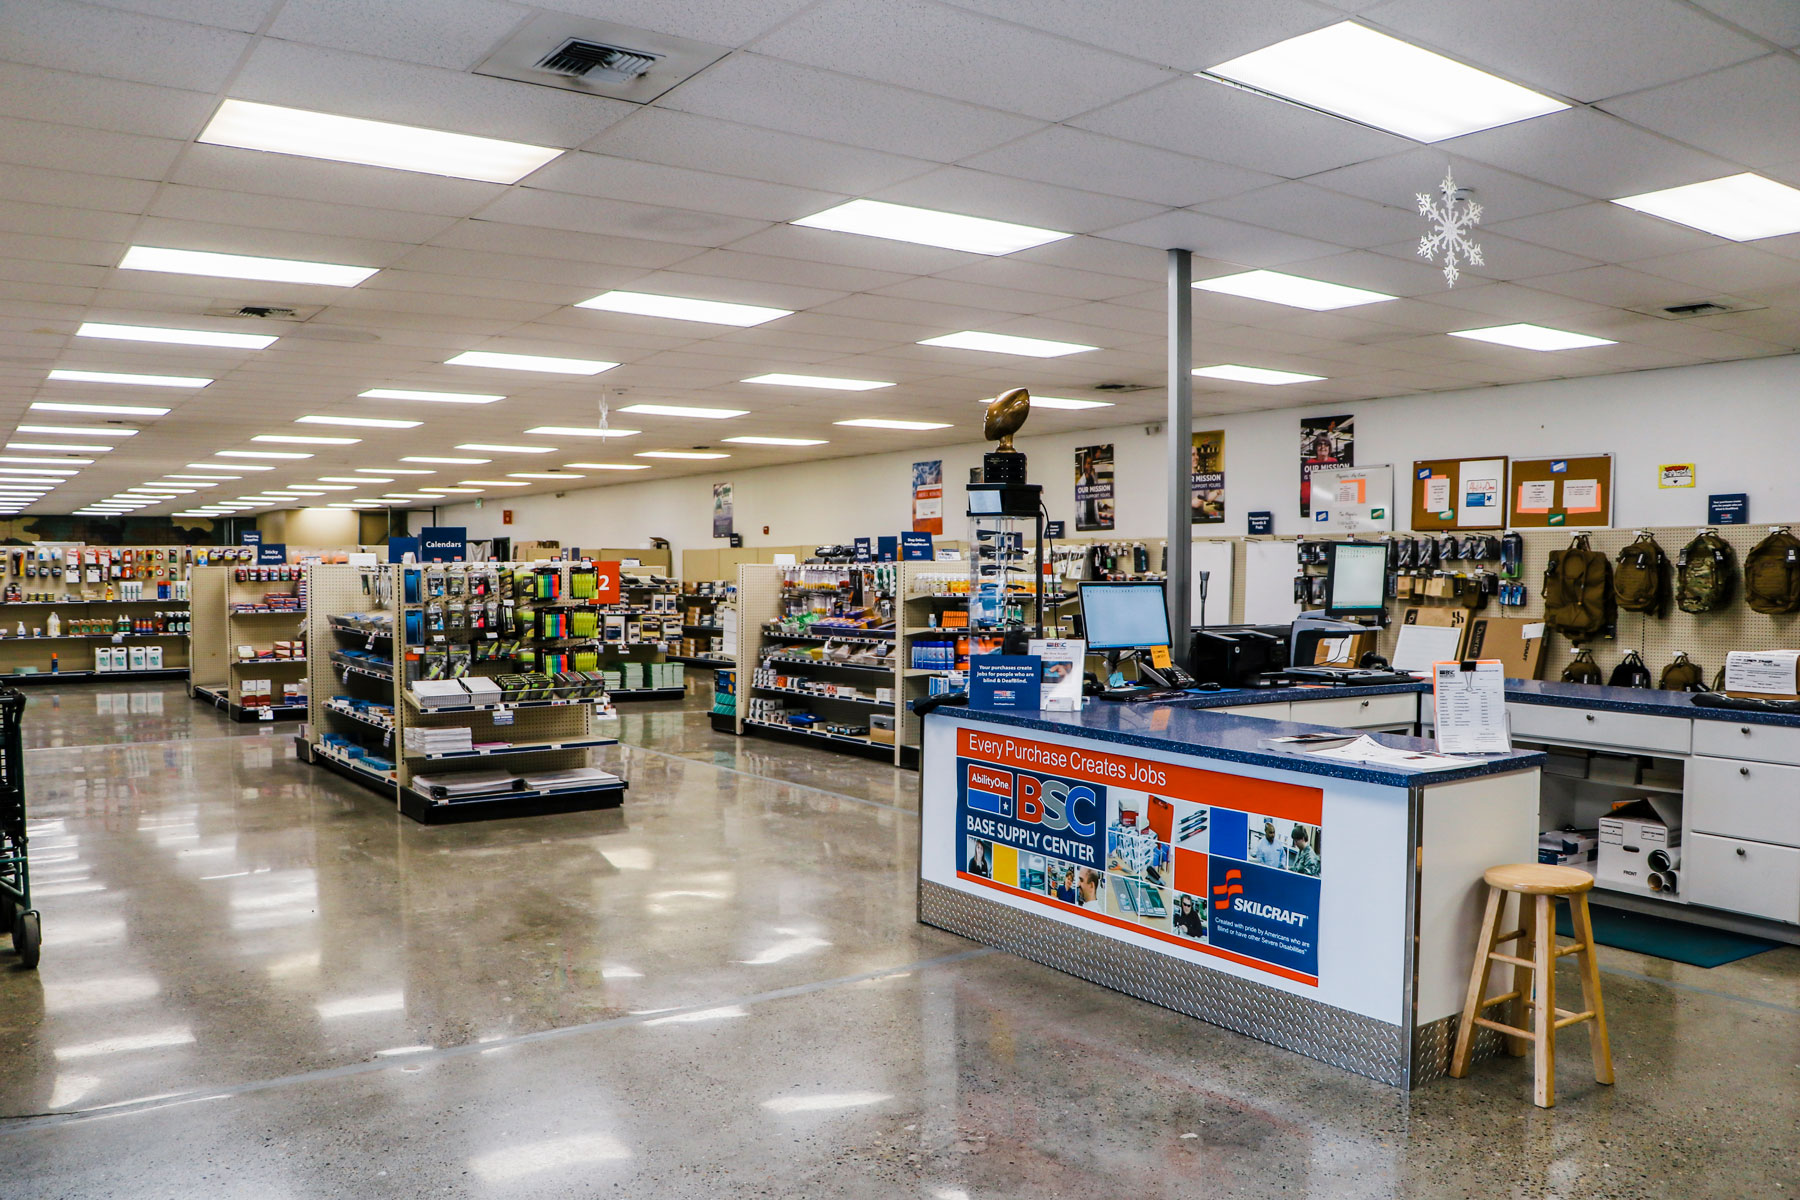 Inside view of a Base Supply Center store.